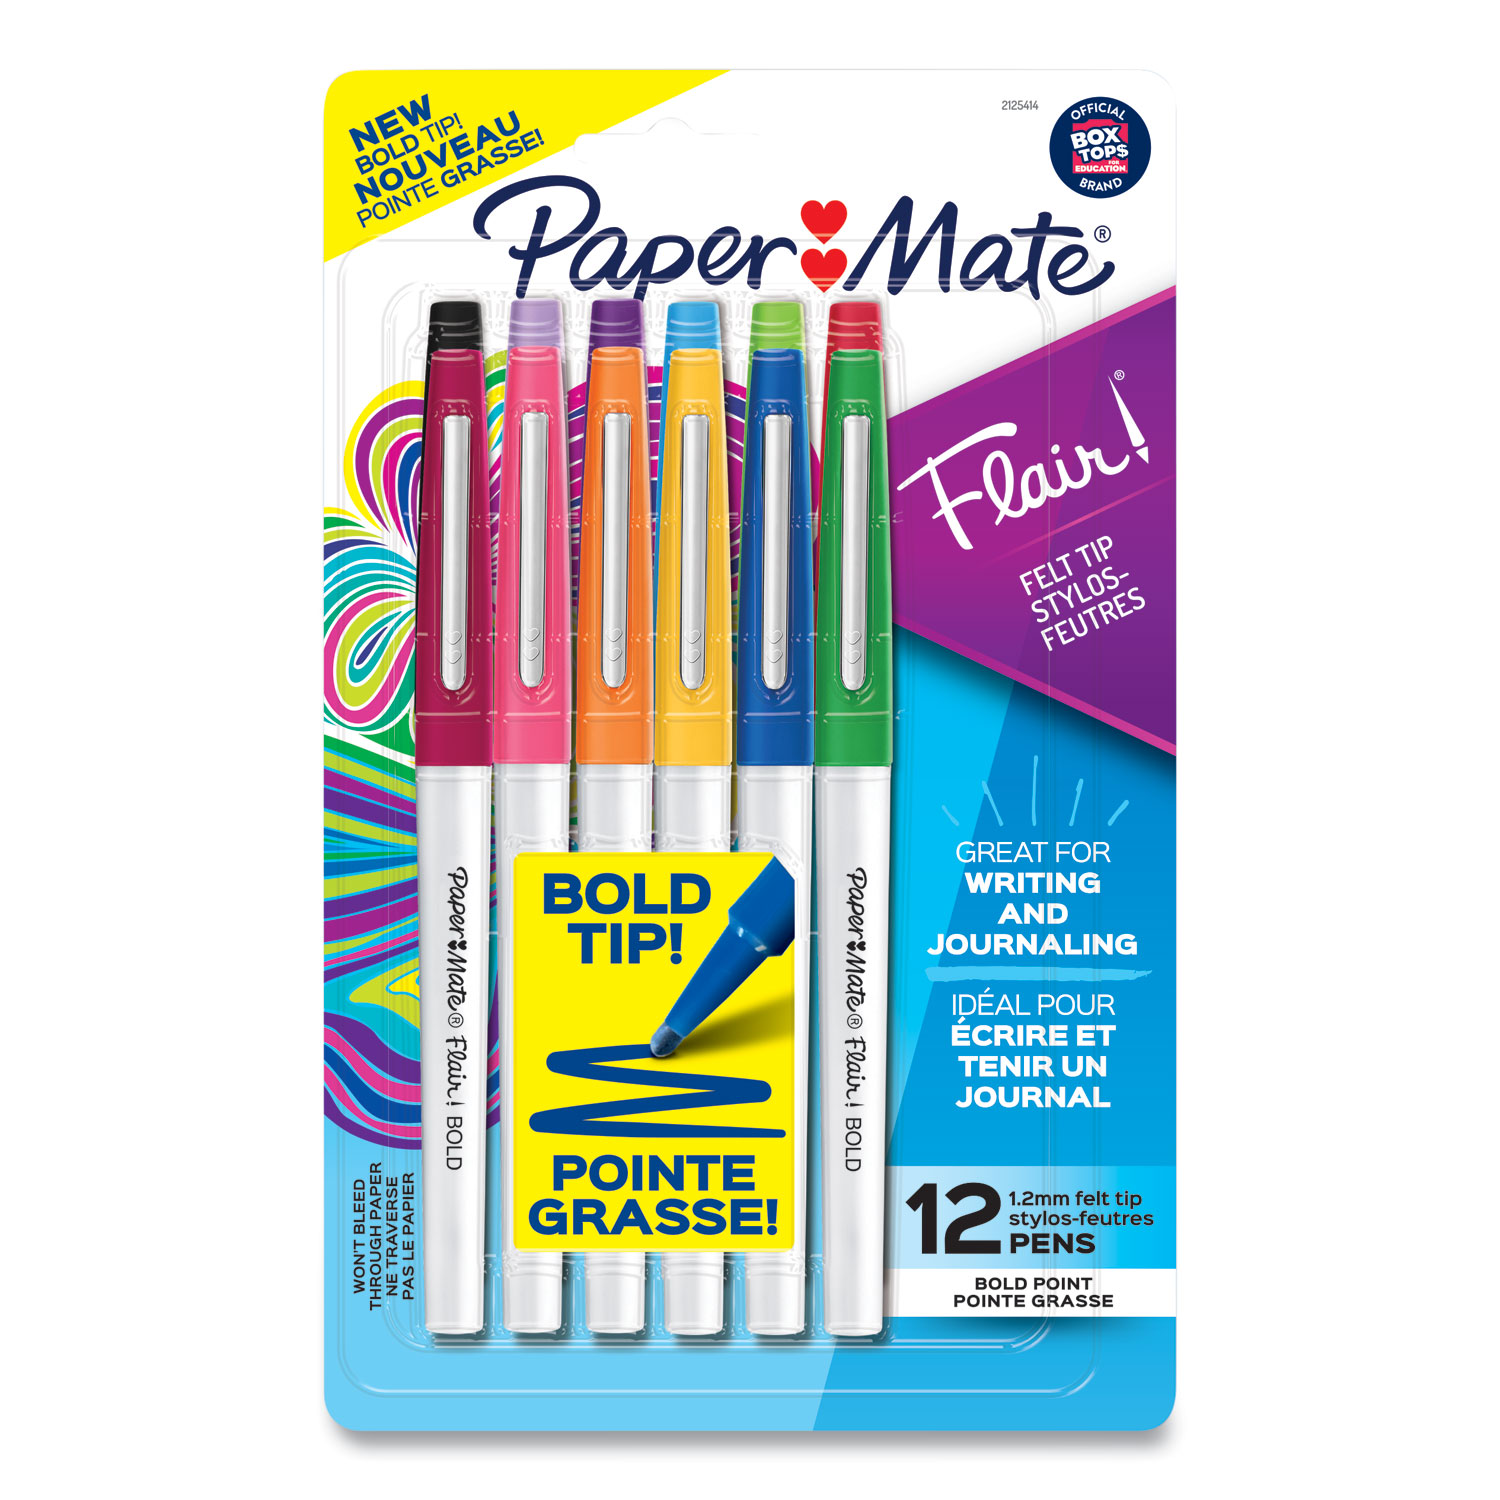 Flair Felt Tip Porous Point Pen, Stick, Medium 0.7 mm, Assorted Ink and  Barrel Colors with Retro Accents, 6/Pack - BOSS Office and Computer Products